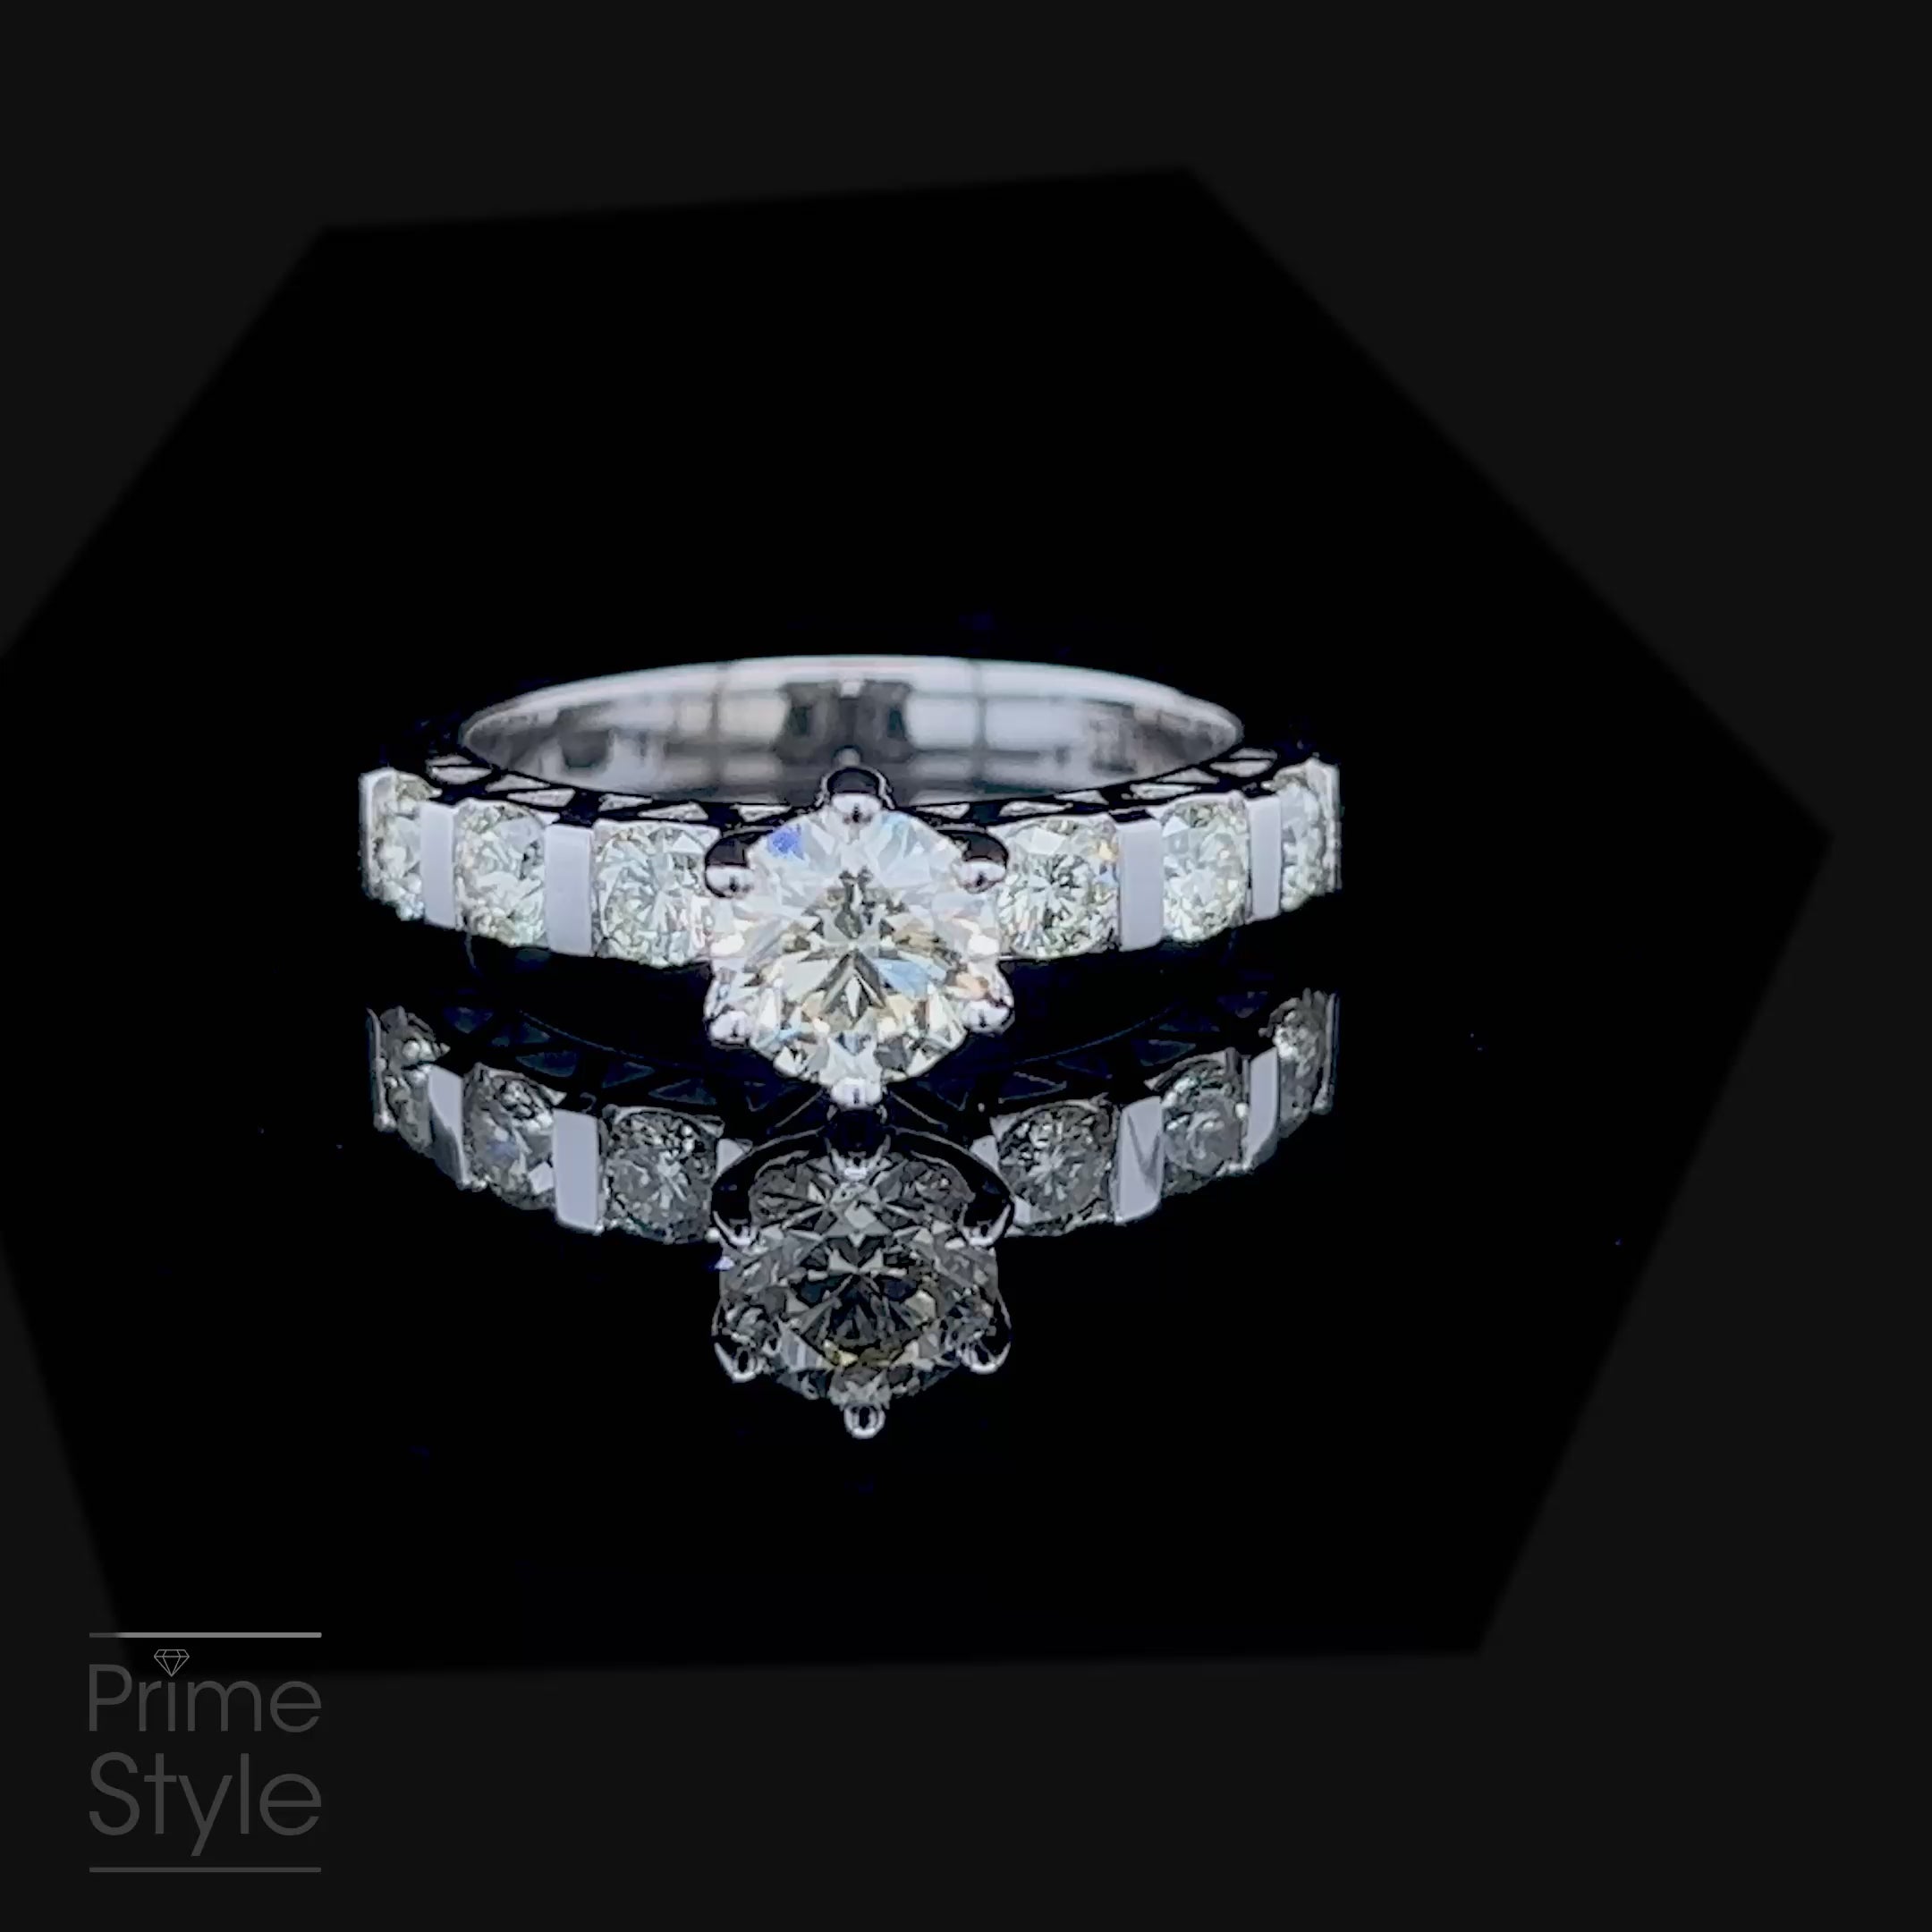 Radiant 1.40 CT Round Cut Diamond Engagement Rings in 14KT White Gold